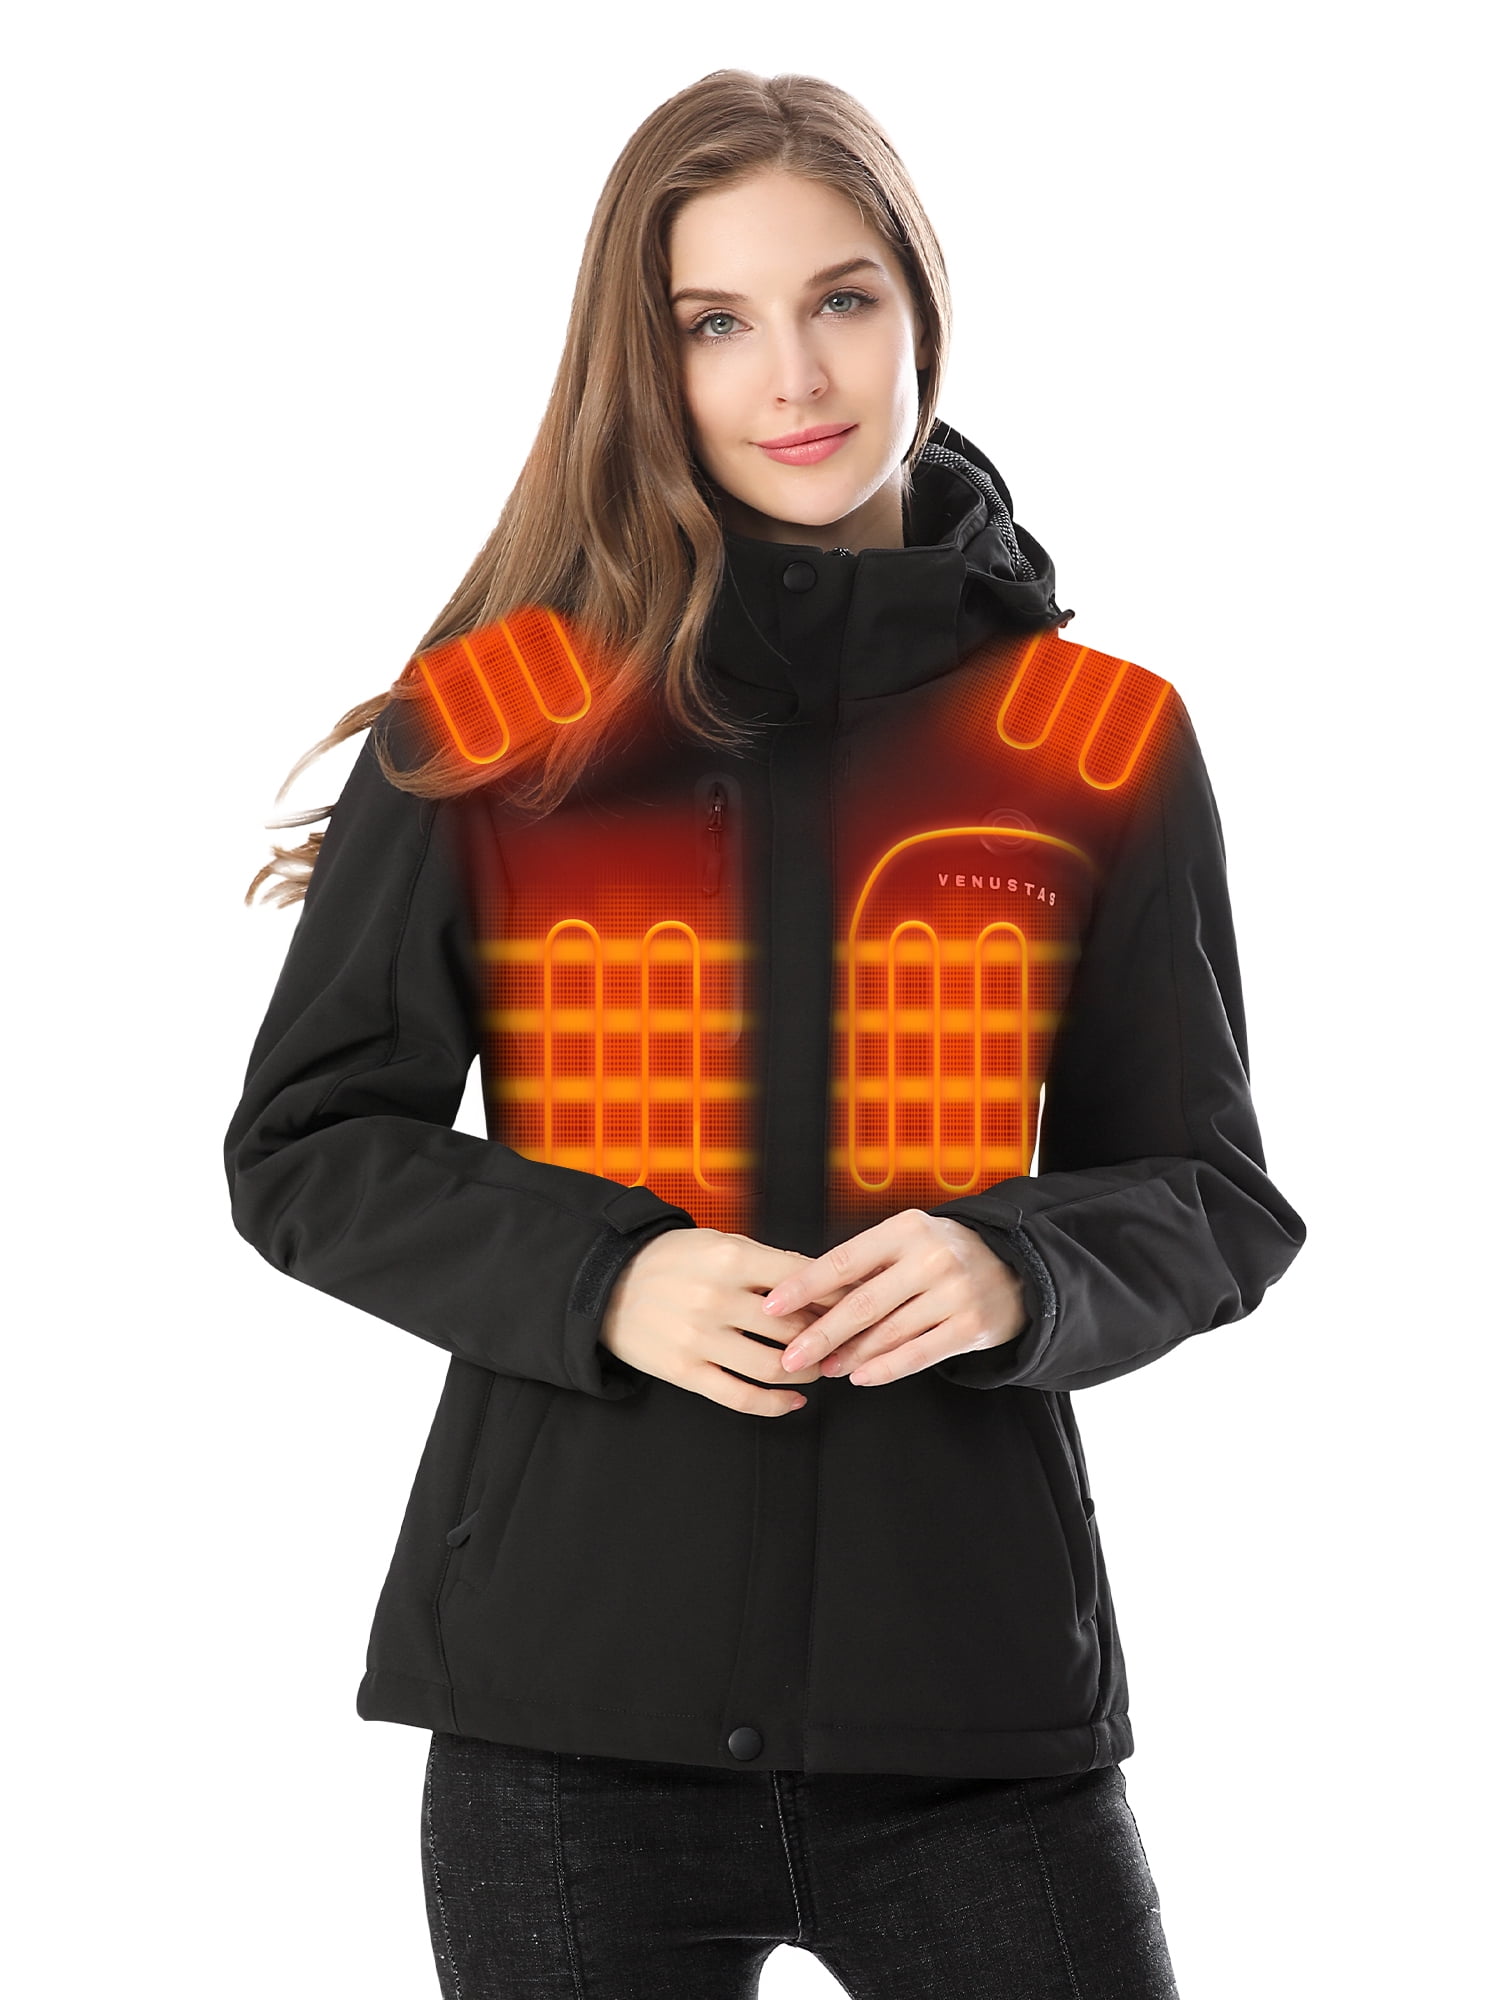 Venustas Women's Heated Jacket with Battery Pack 7.4V 3 Heating Levels ...